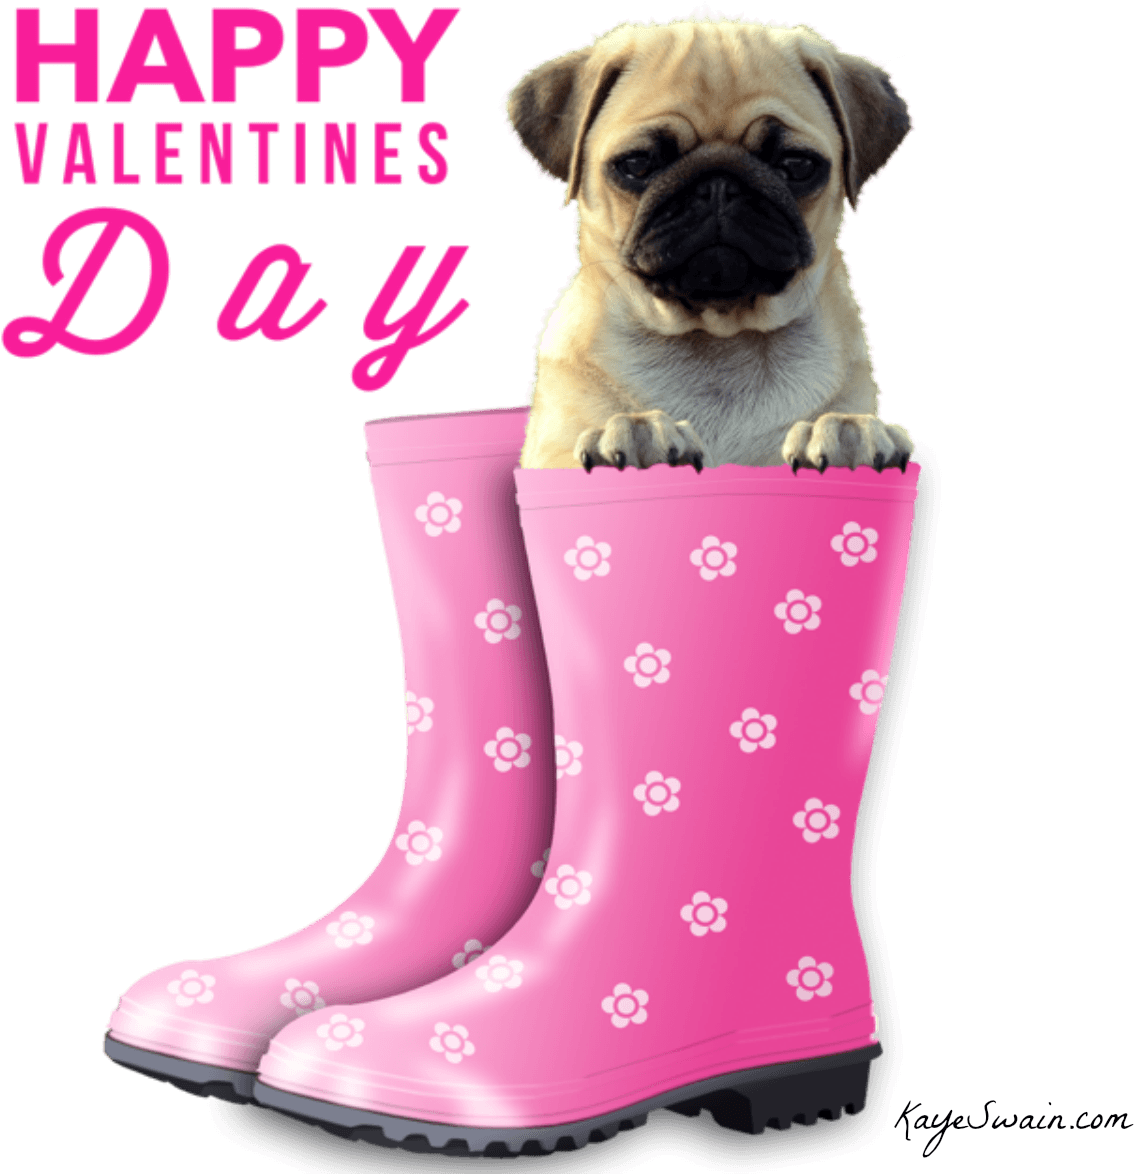 Happy Valentines Day Dog Pictures - Too Cute Baby Pug (1200x1200)